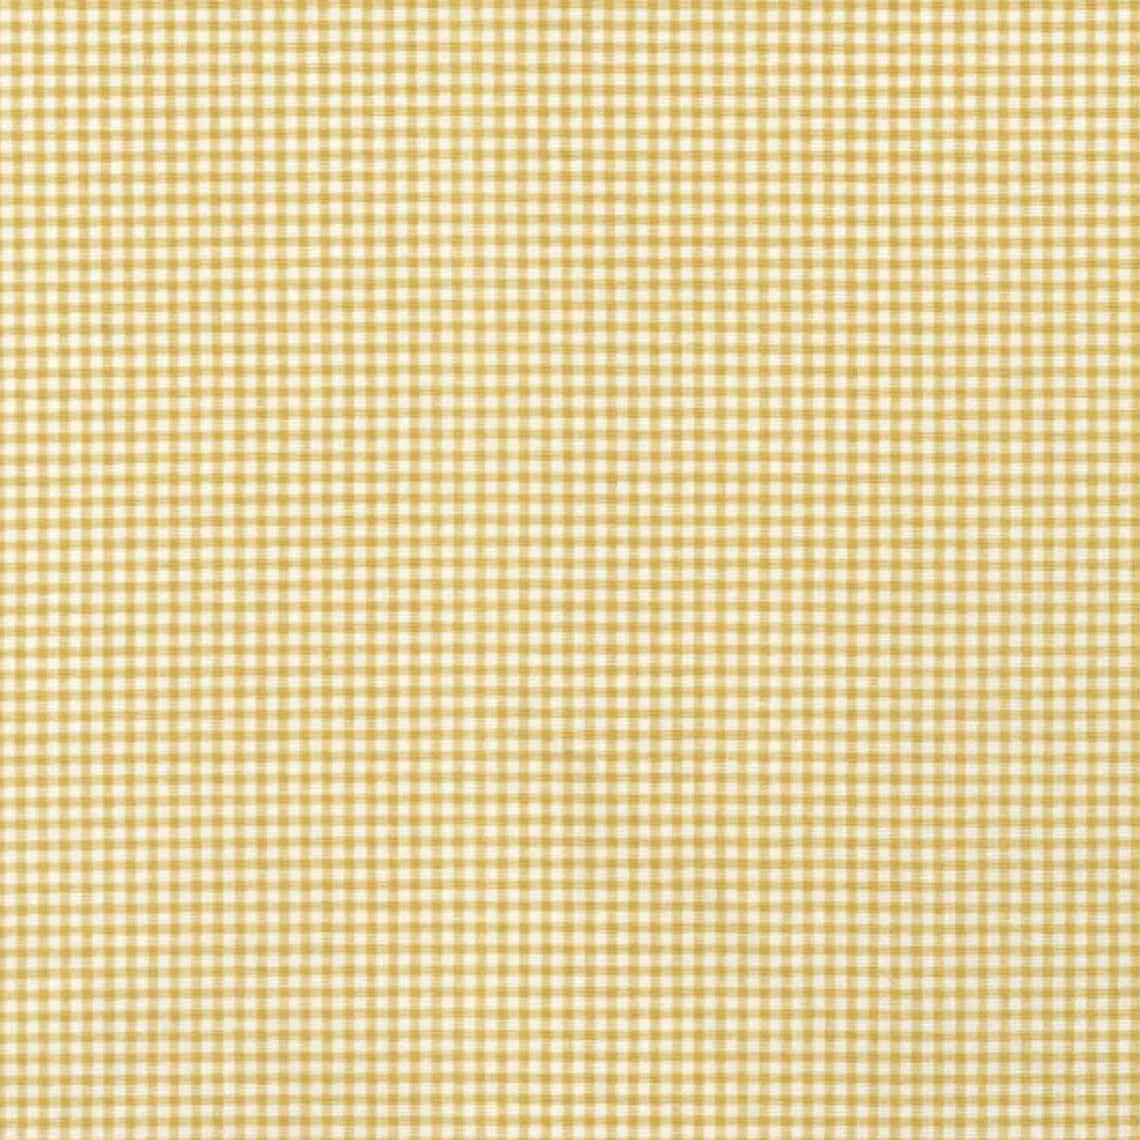 tailored tier cafe curtain panels pair in farmhouse barley yellow gold gingham check